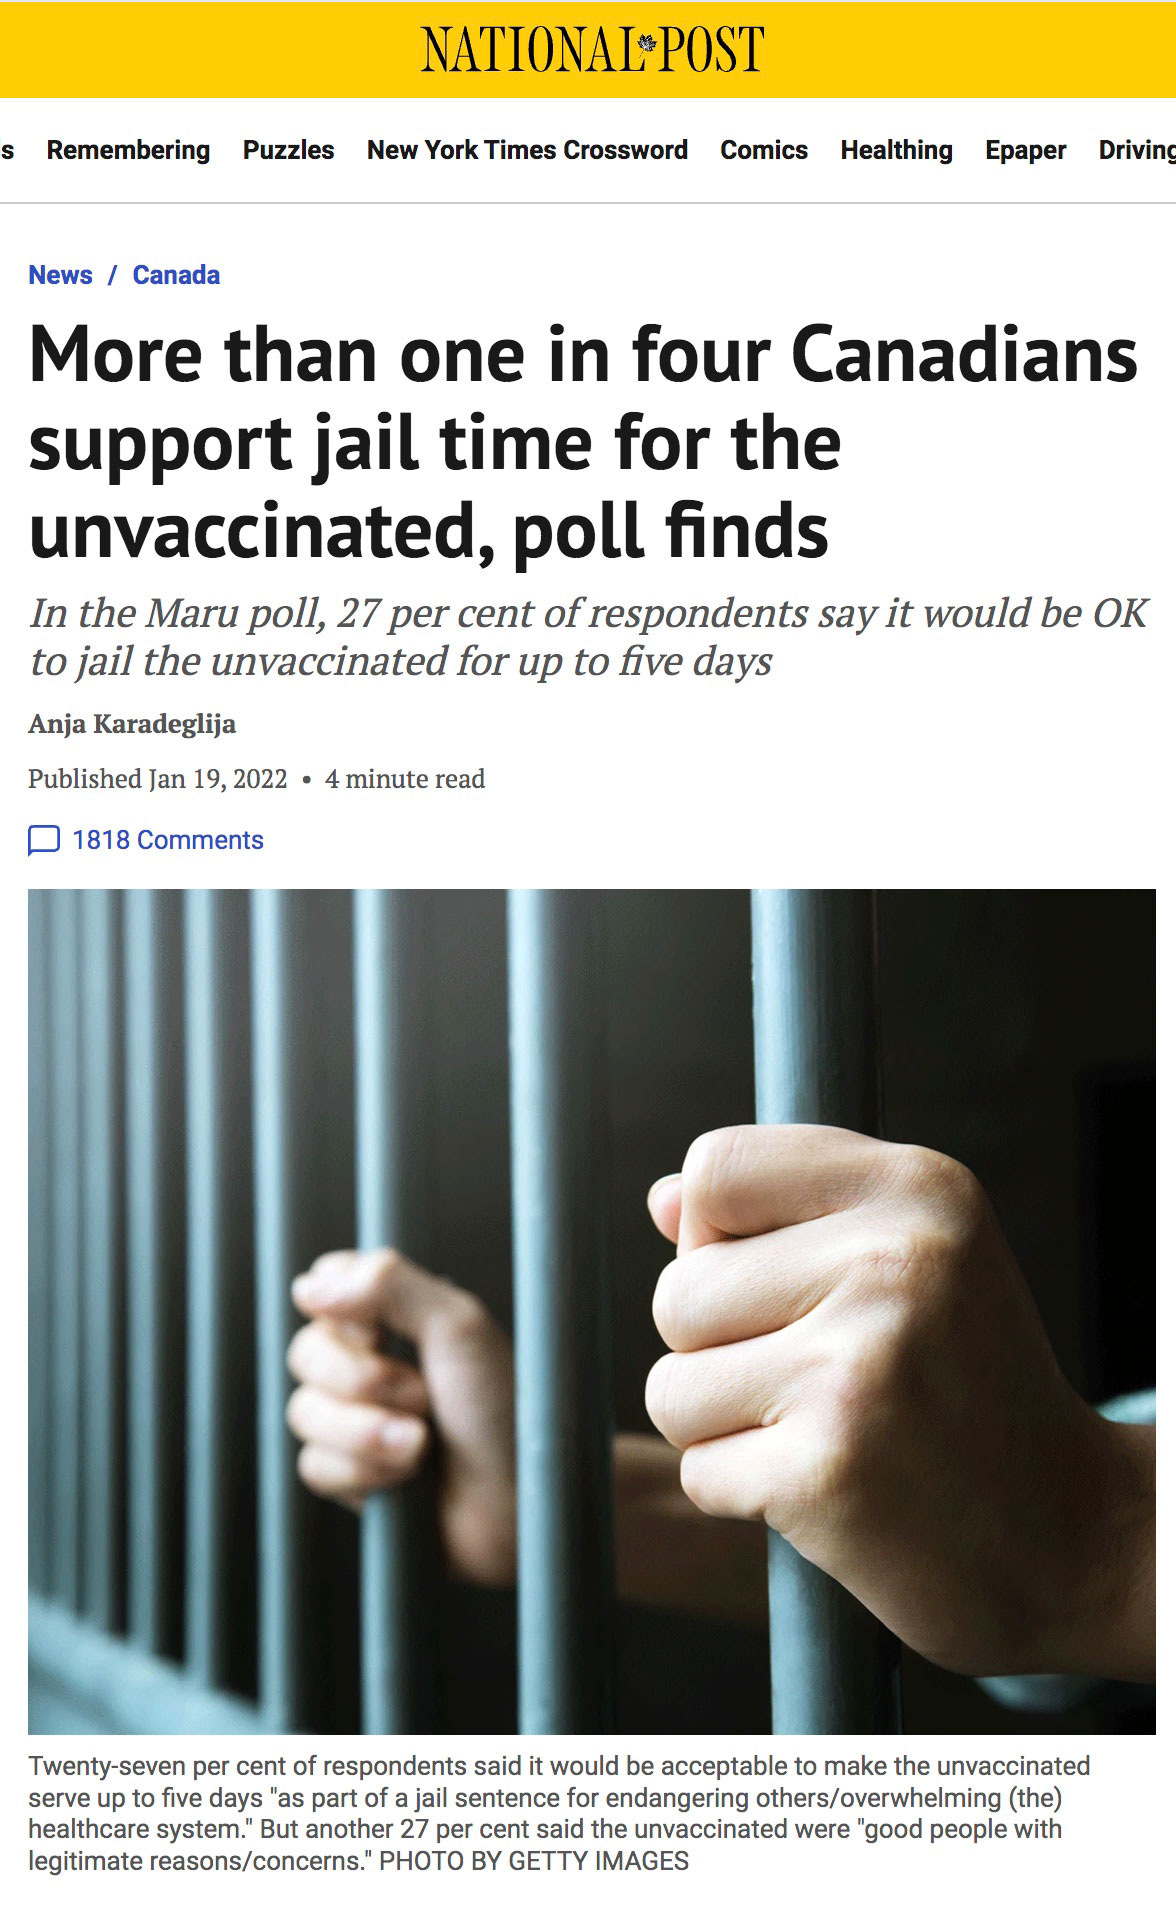 National Post: Canadians Support Jail Time for the Unvaccinated